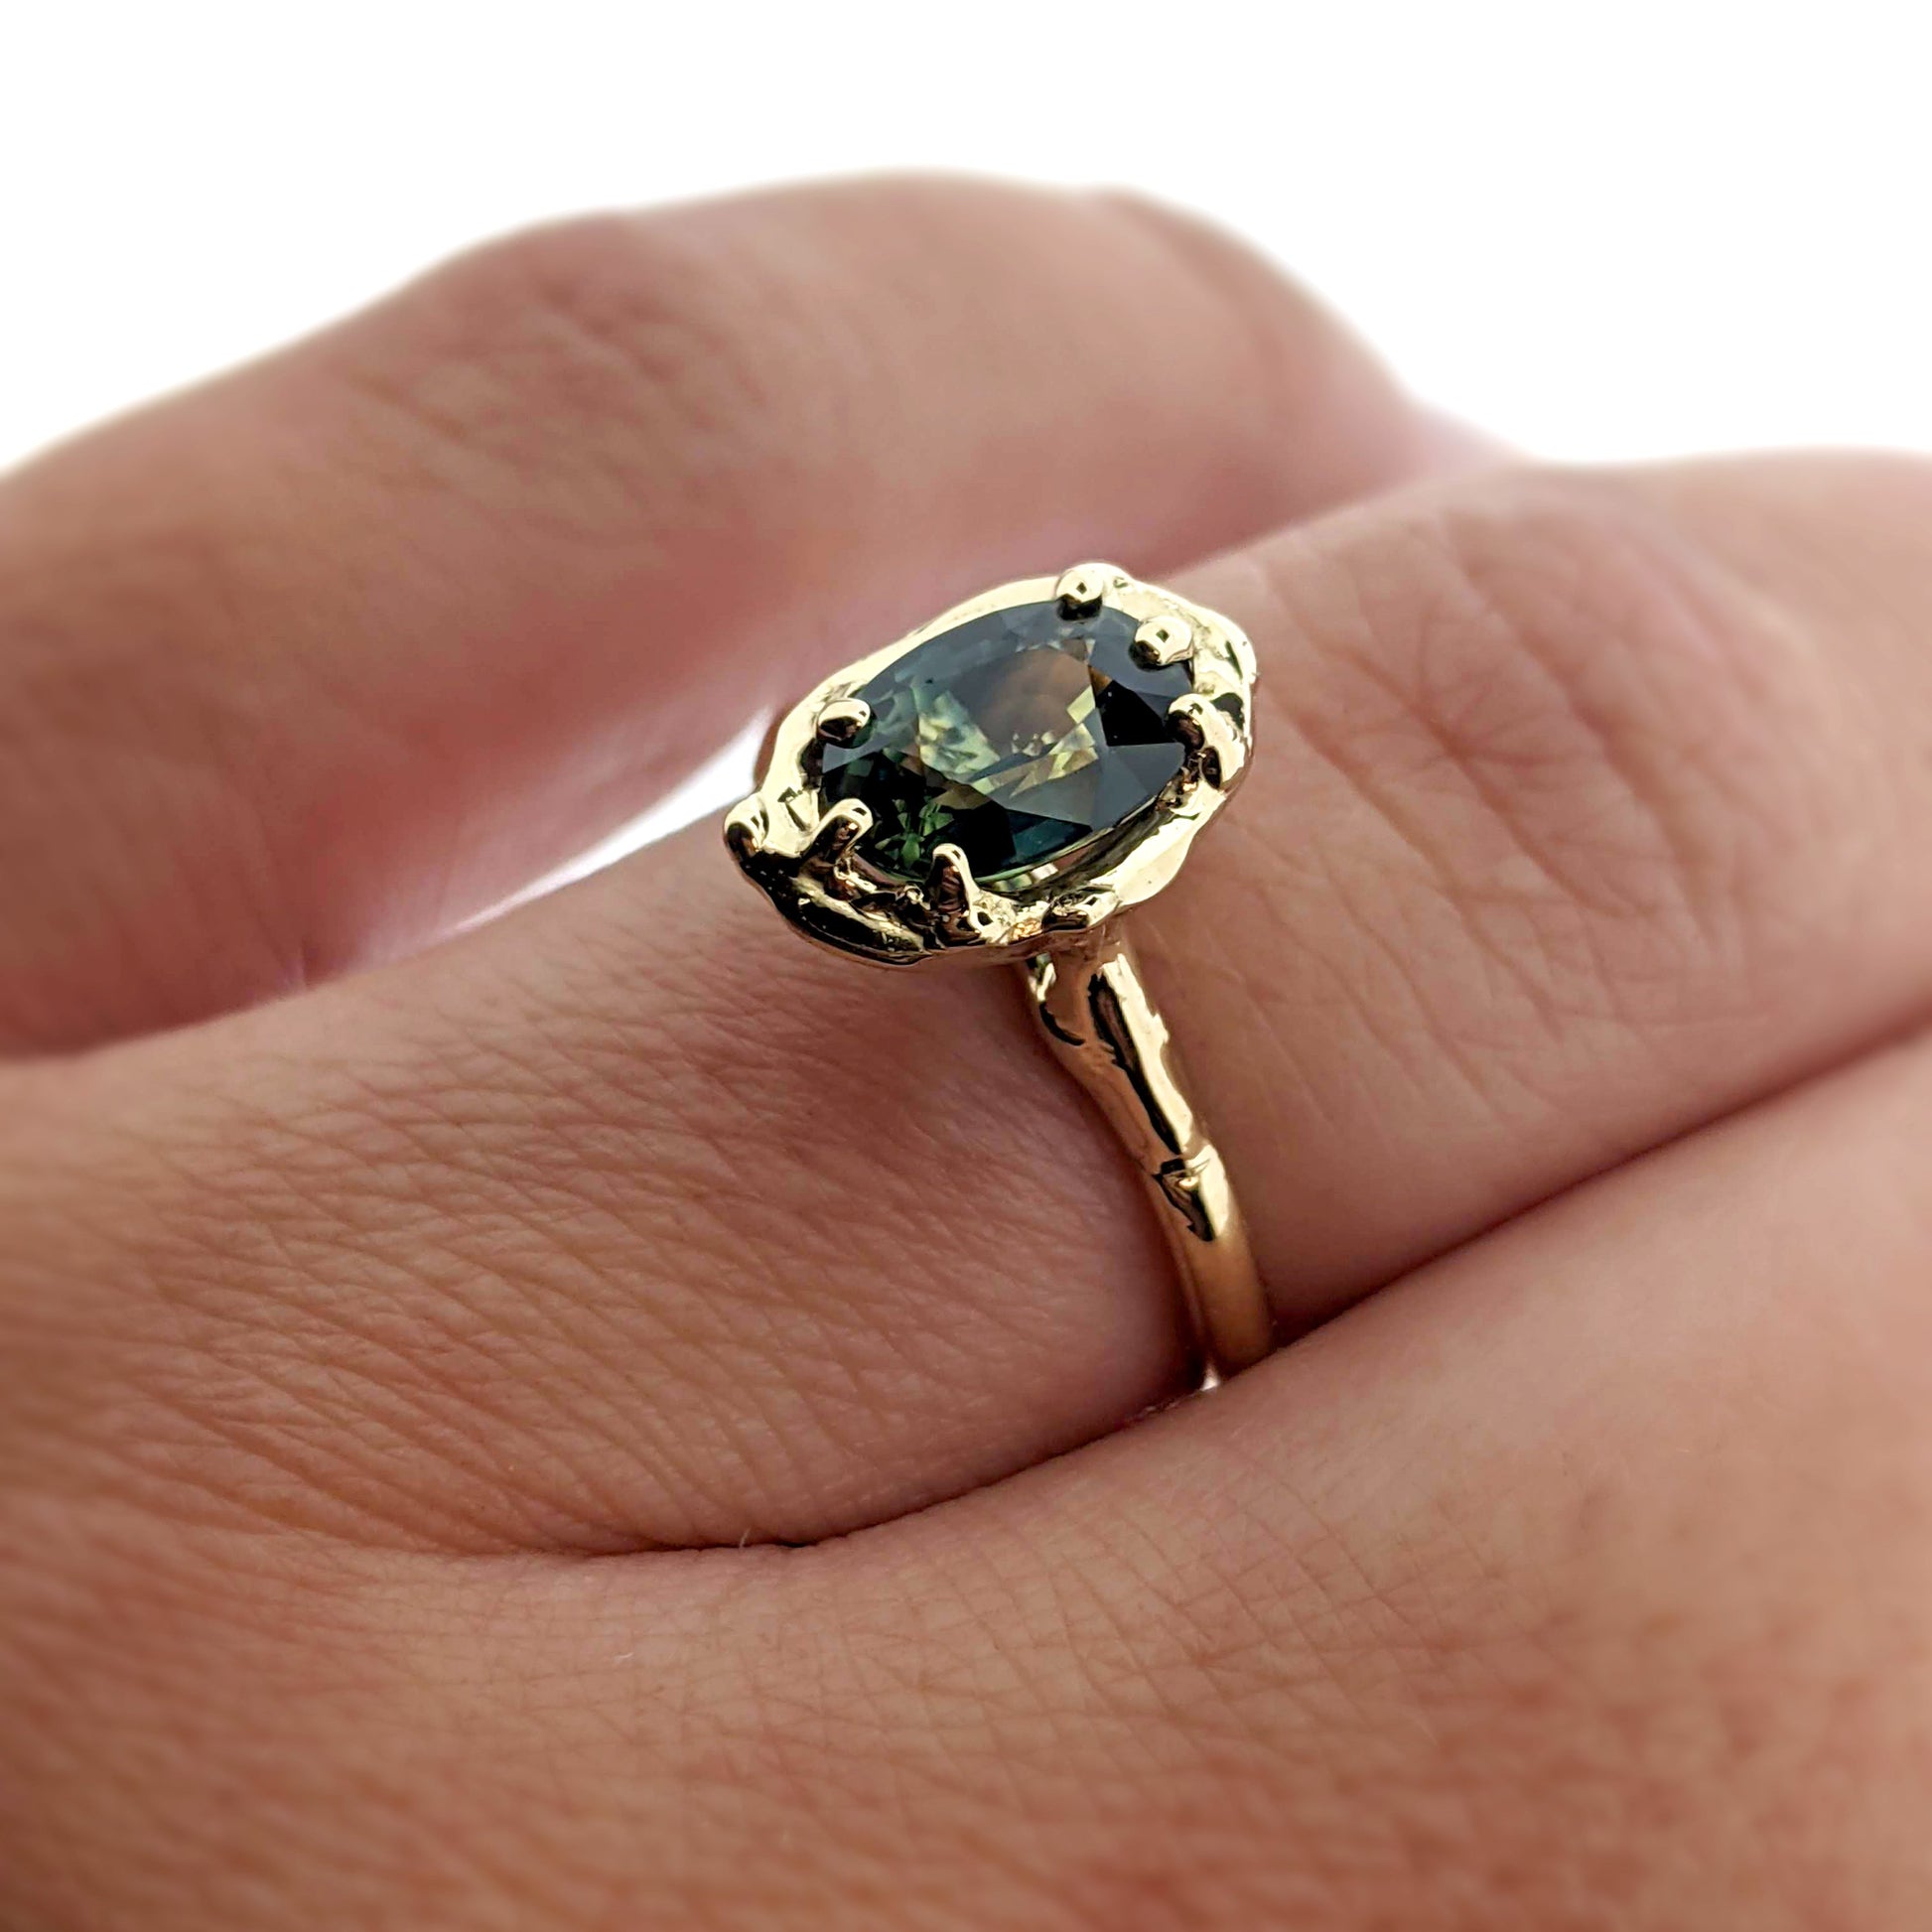 Side view of Rianna Ring on woman's finger to help give an idea of its scale.